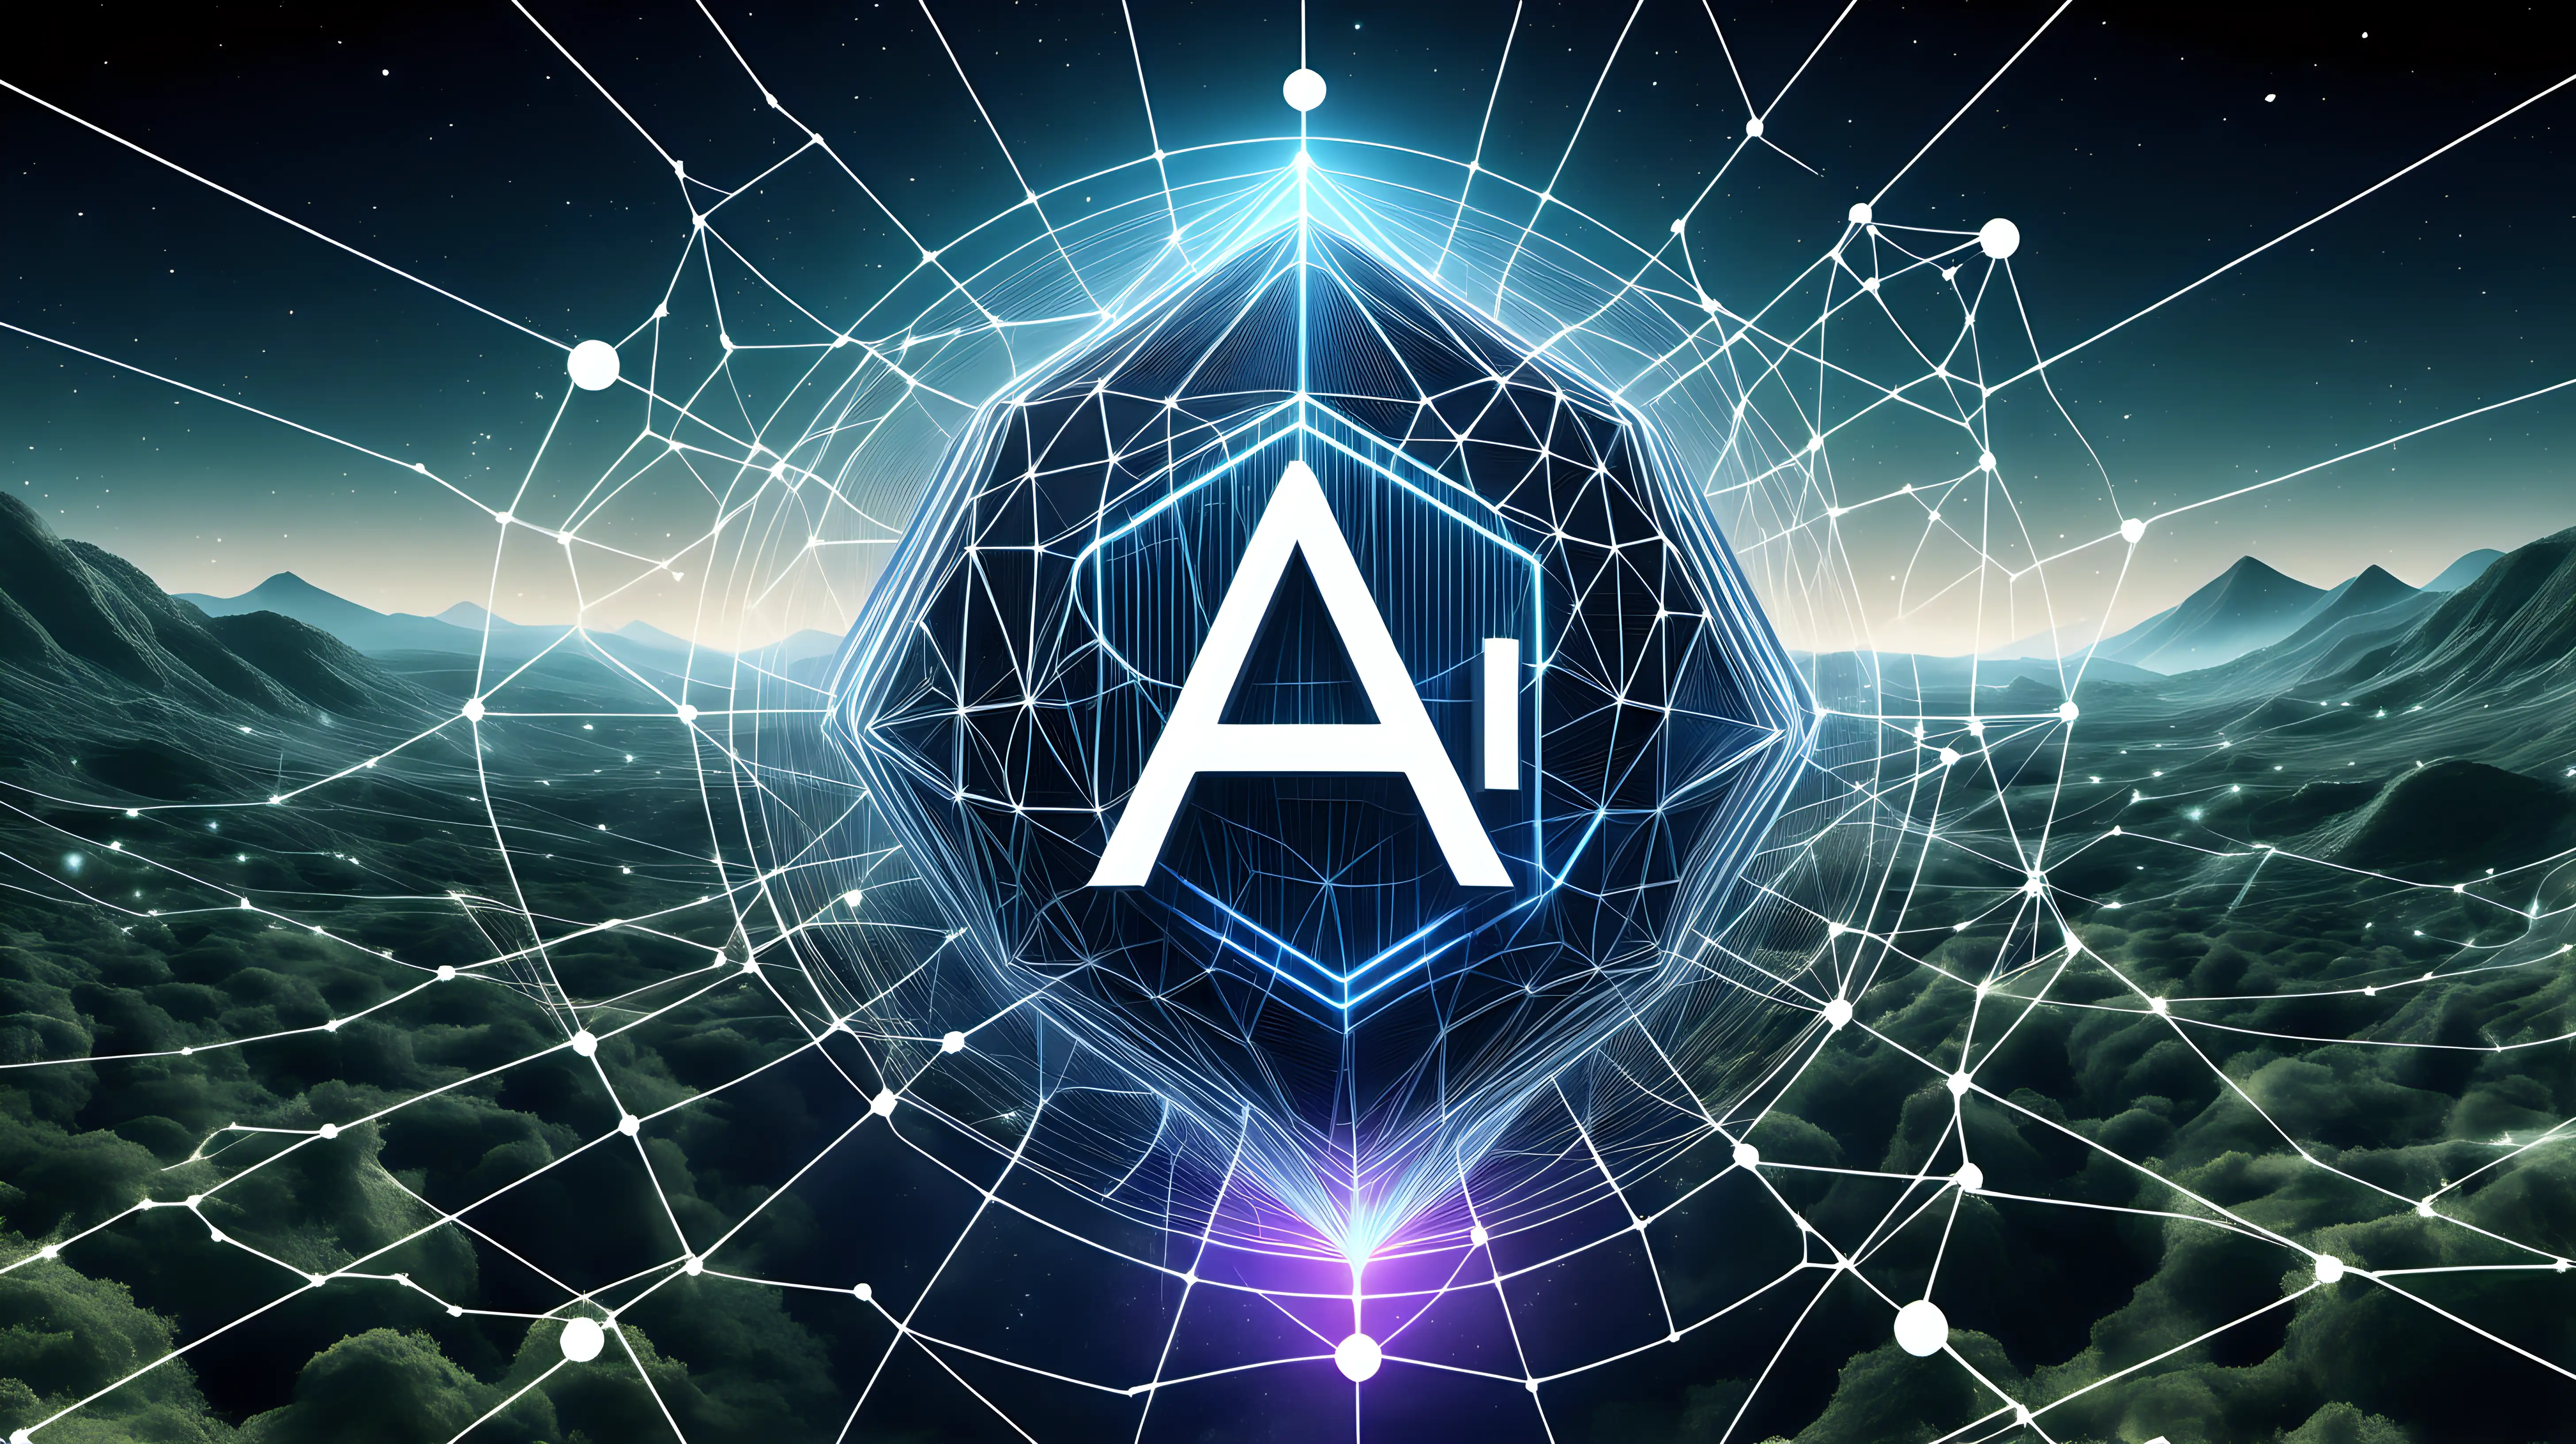 Futuristic AI Technology Central Emblem Amidst Interconnected Nodes and Energy Waves